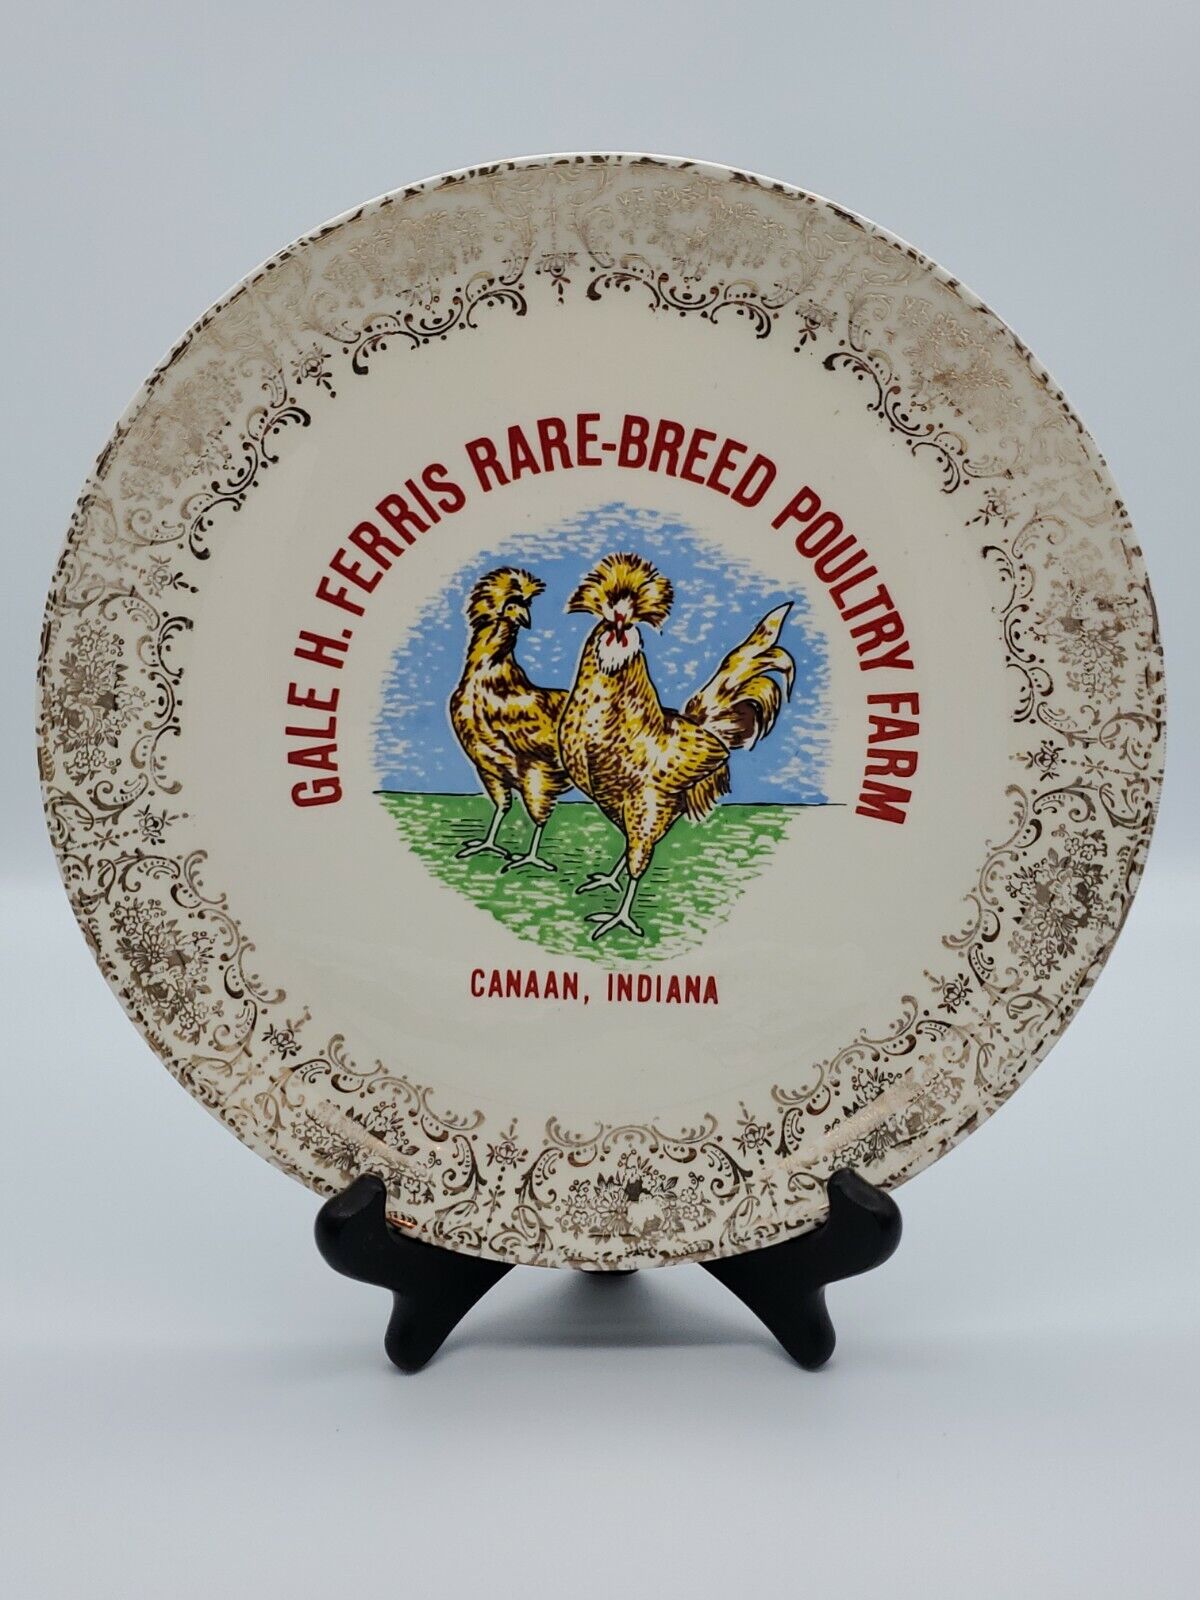 Vintage Gale H. Ferris Rare Breed Poultry Farm Canaan, Indiana Ornate Plate